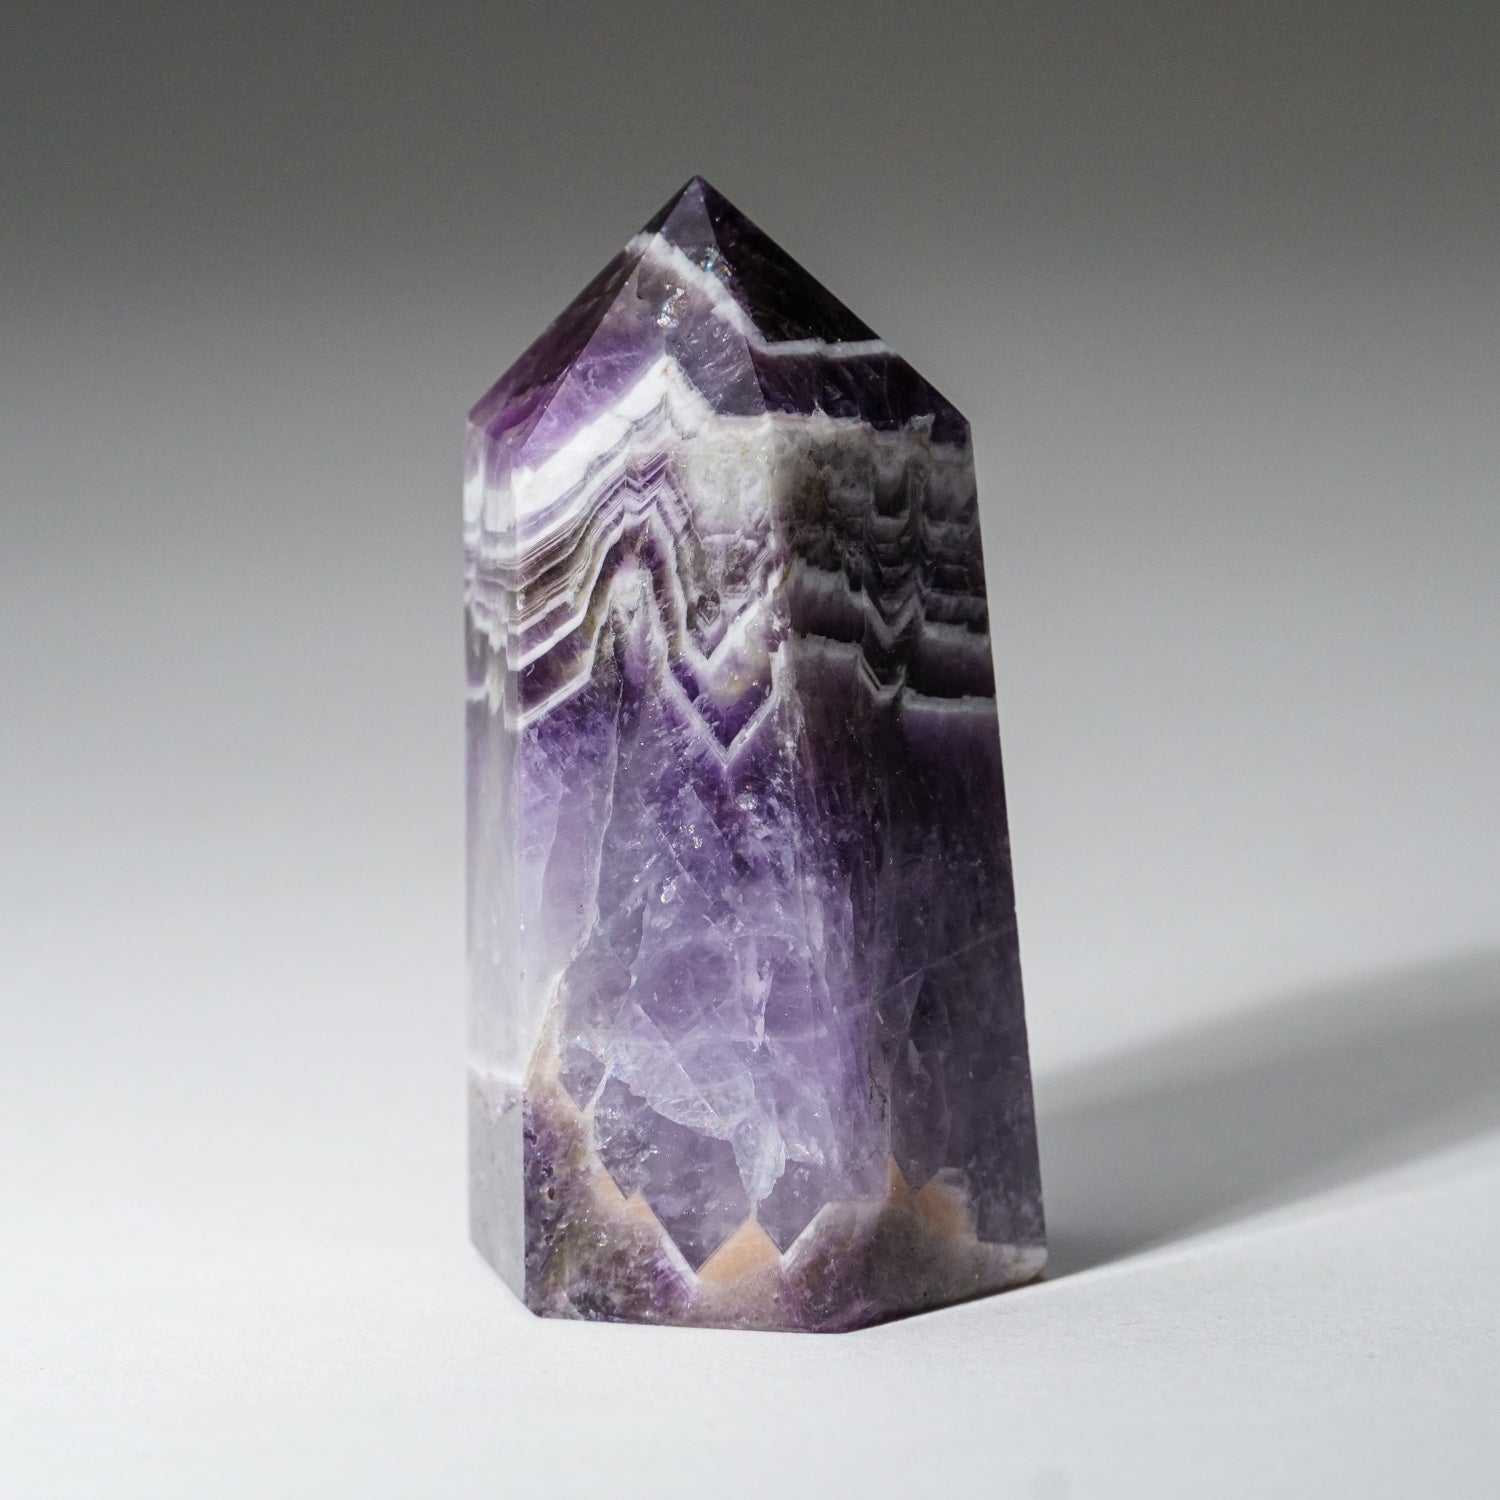 Polished Chevron Amethyst Point from Brazil (121 grams)